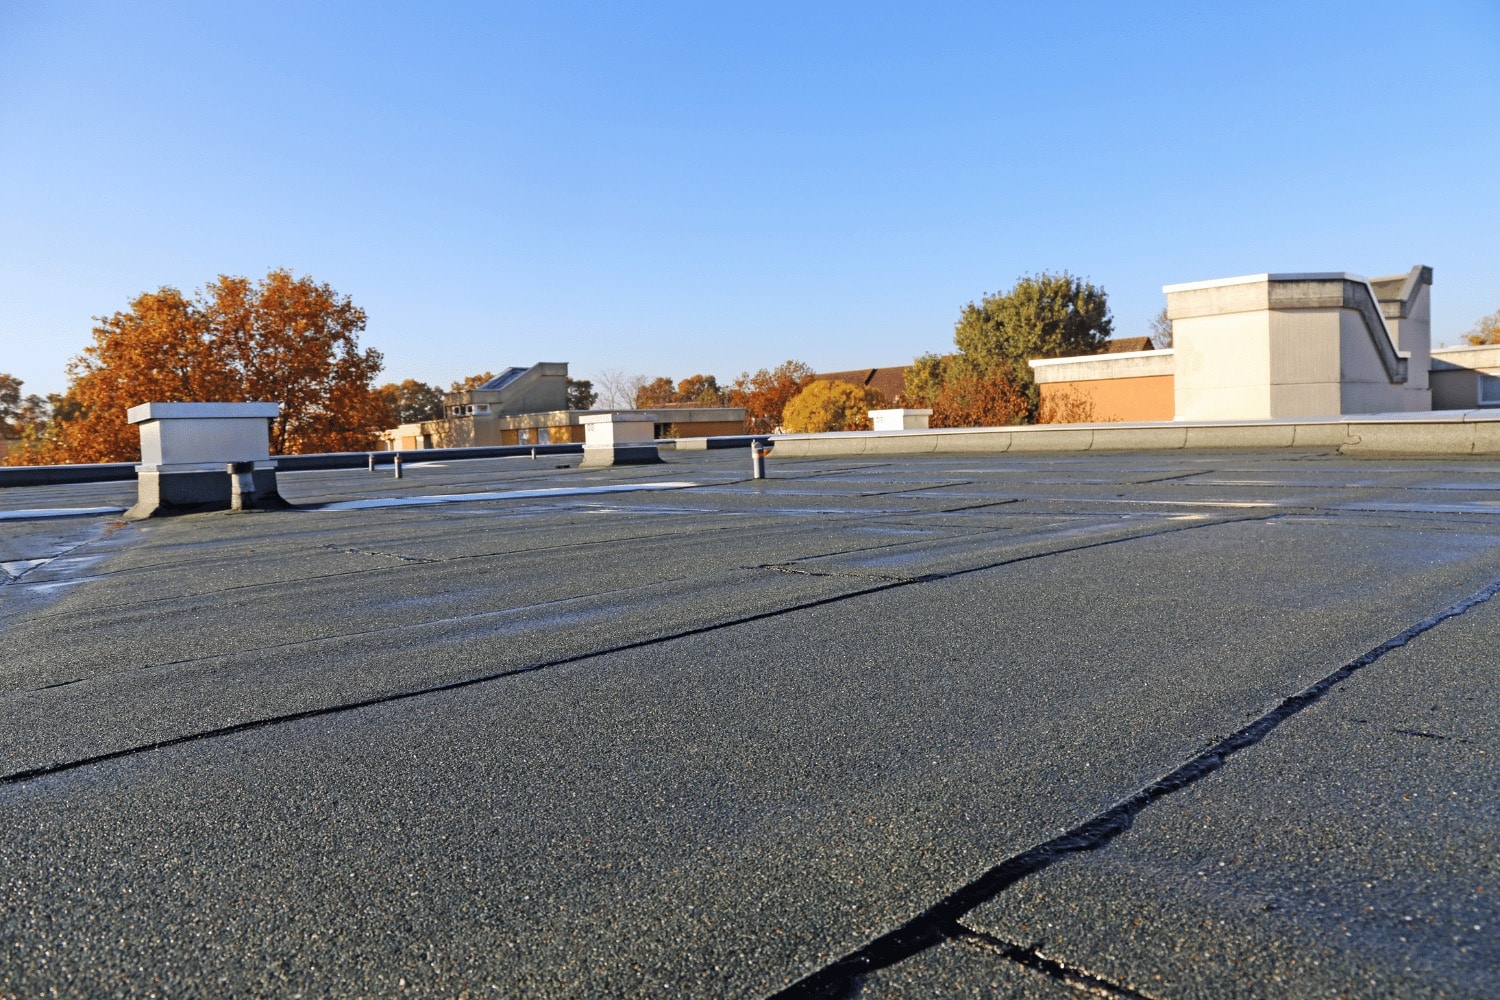 Commercial flat roof replacement